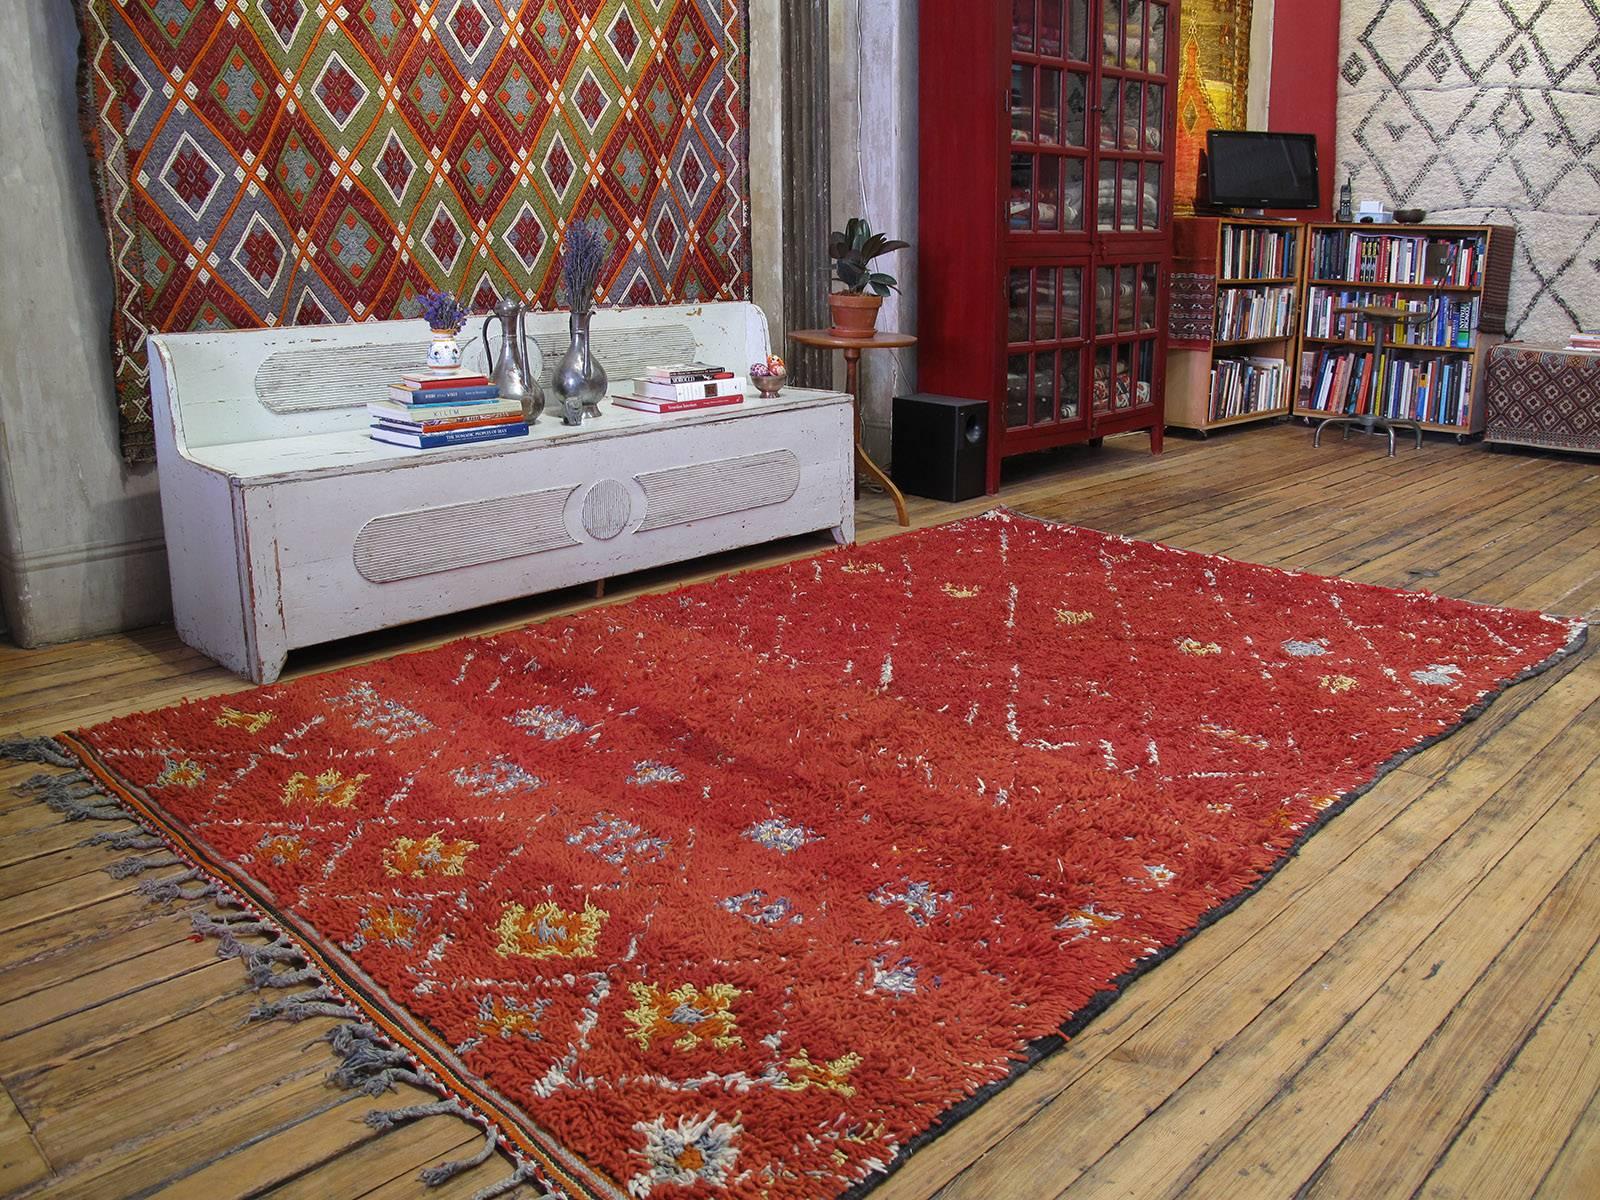 A very nice tribal carpet from the Middle Atlas Mountains, with warm colors, displaying the characteristic Moroccan Berber aesthetic.